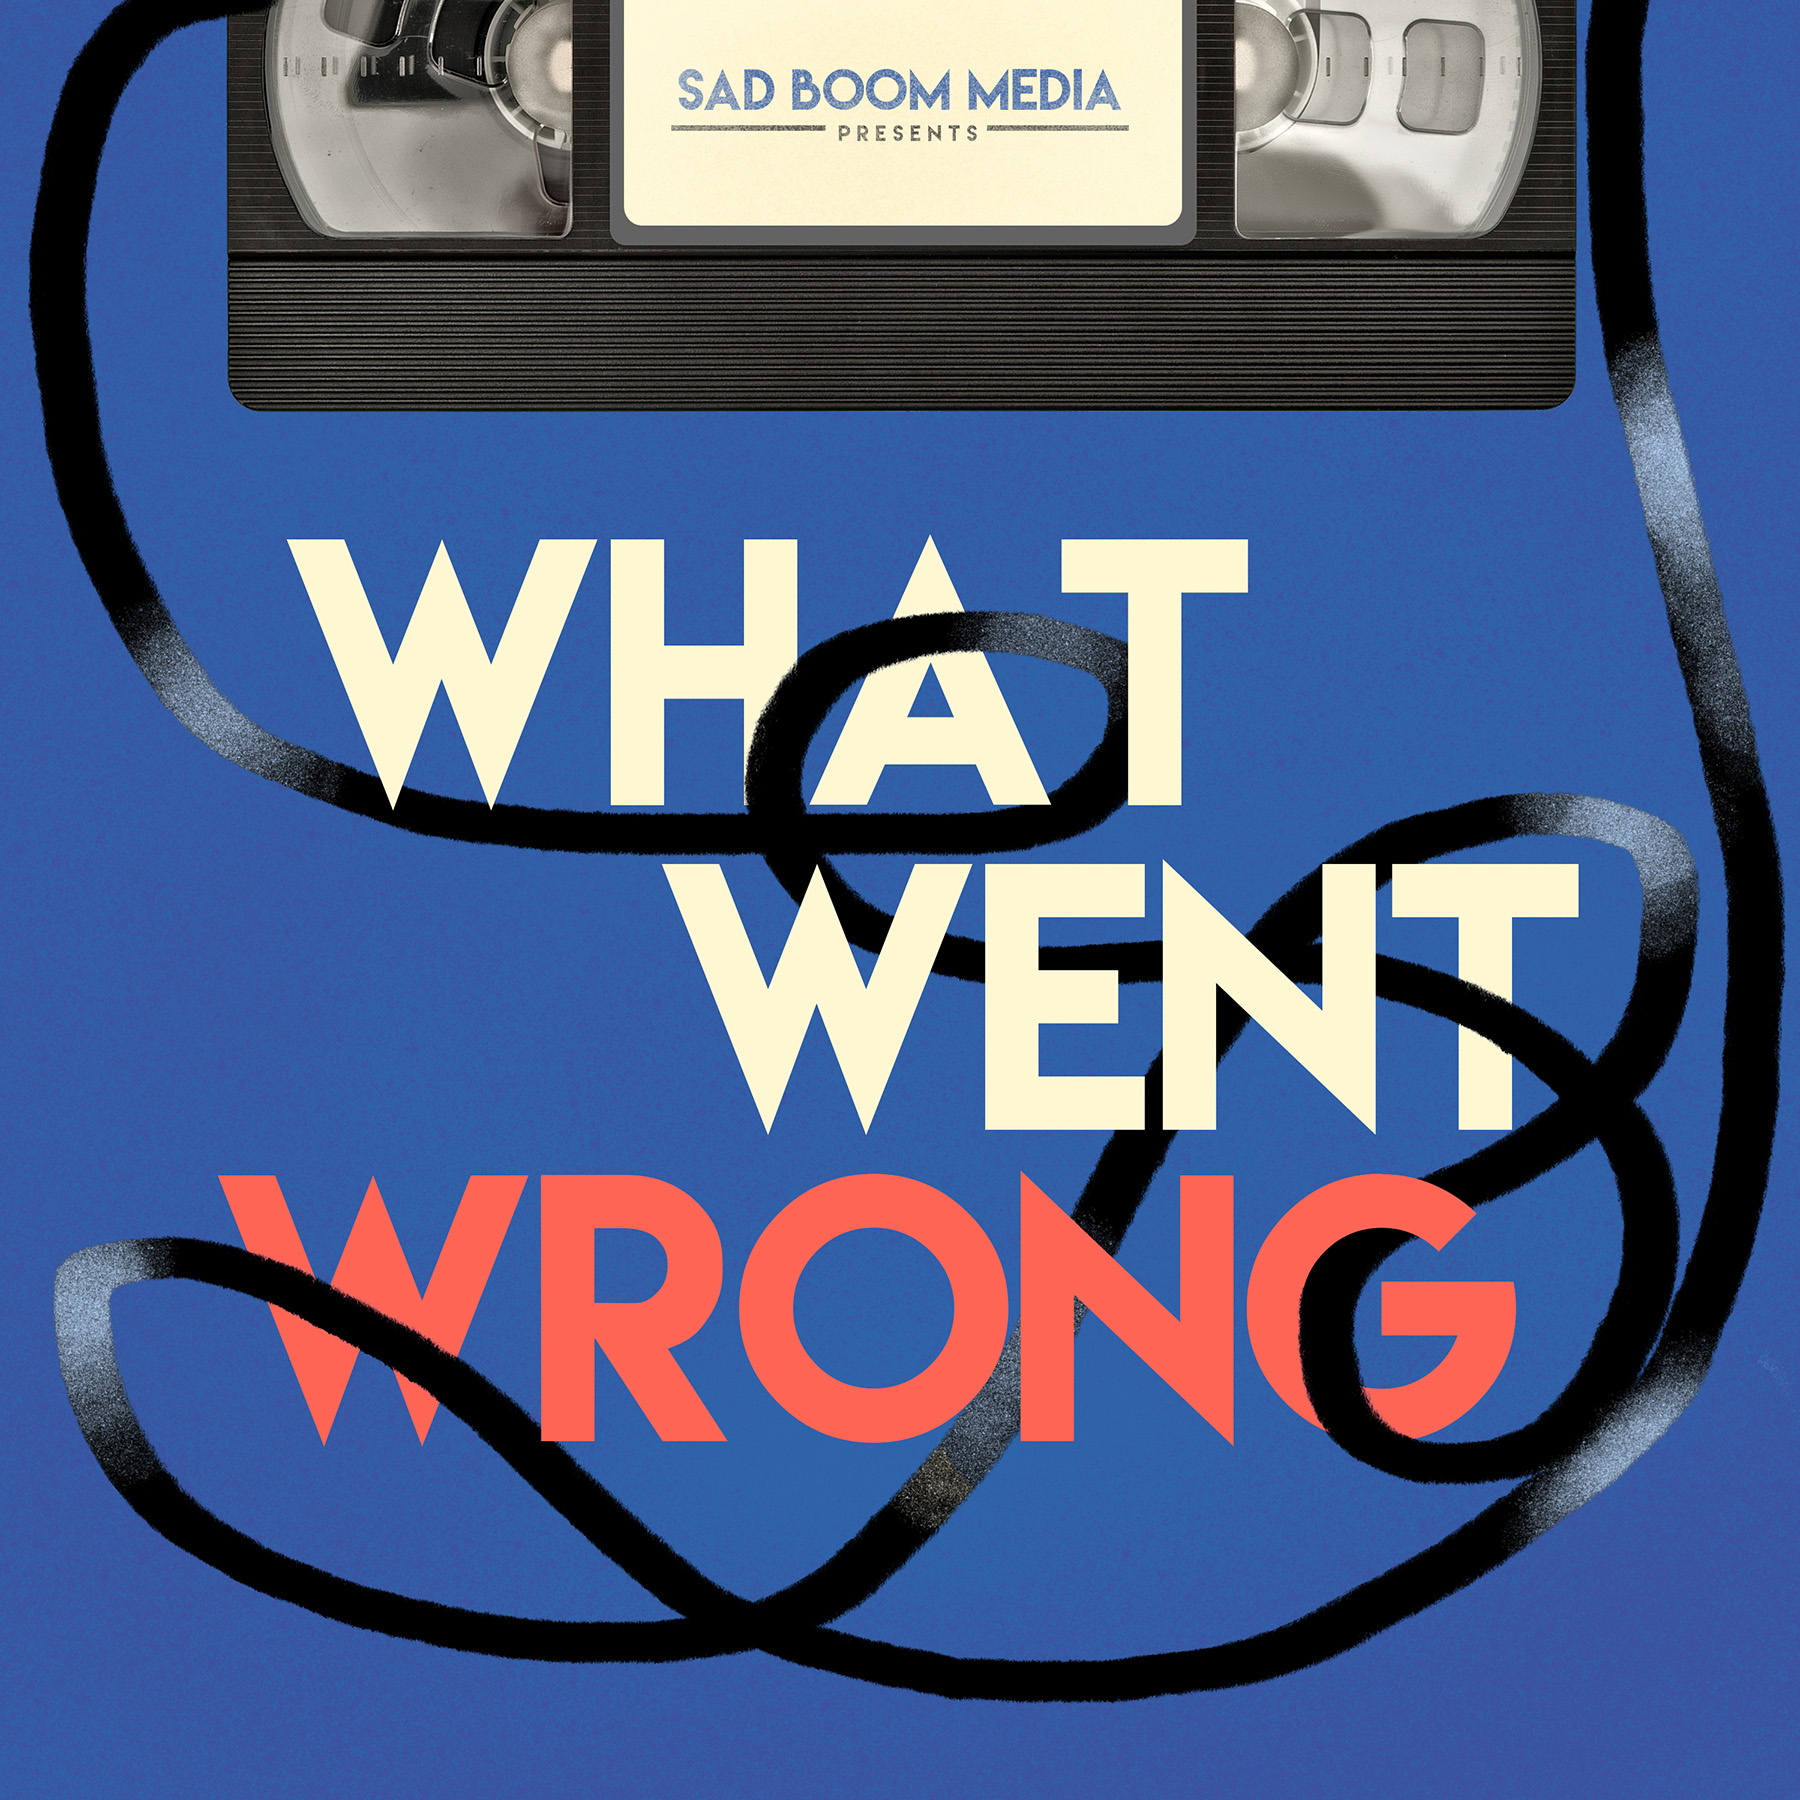 WHAT WENT WRONG:Sad Boom Media